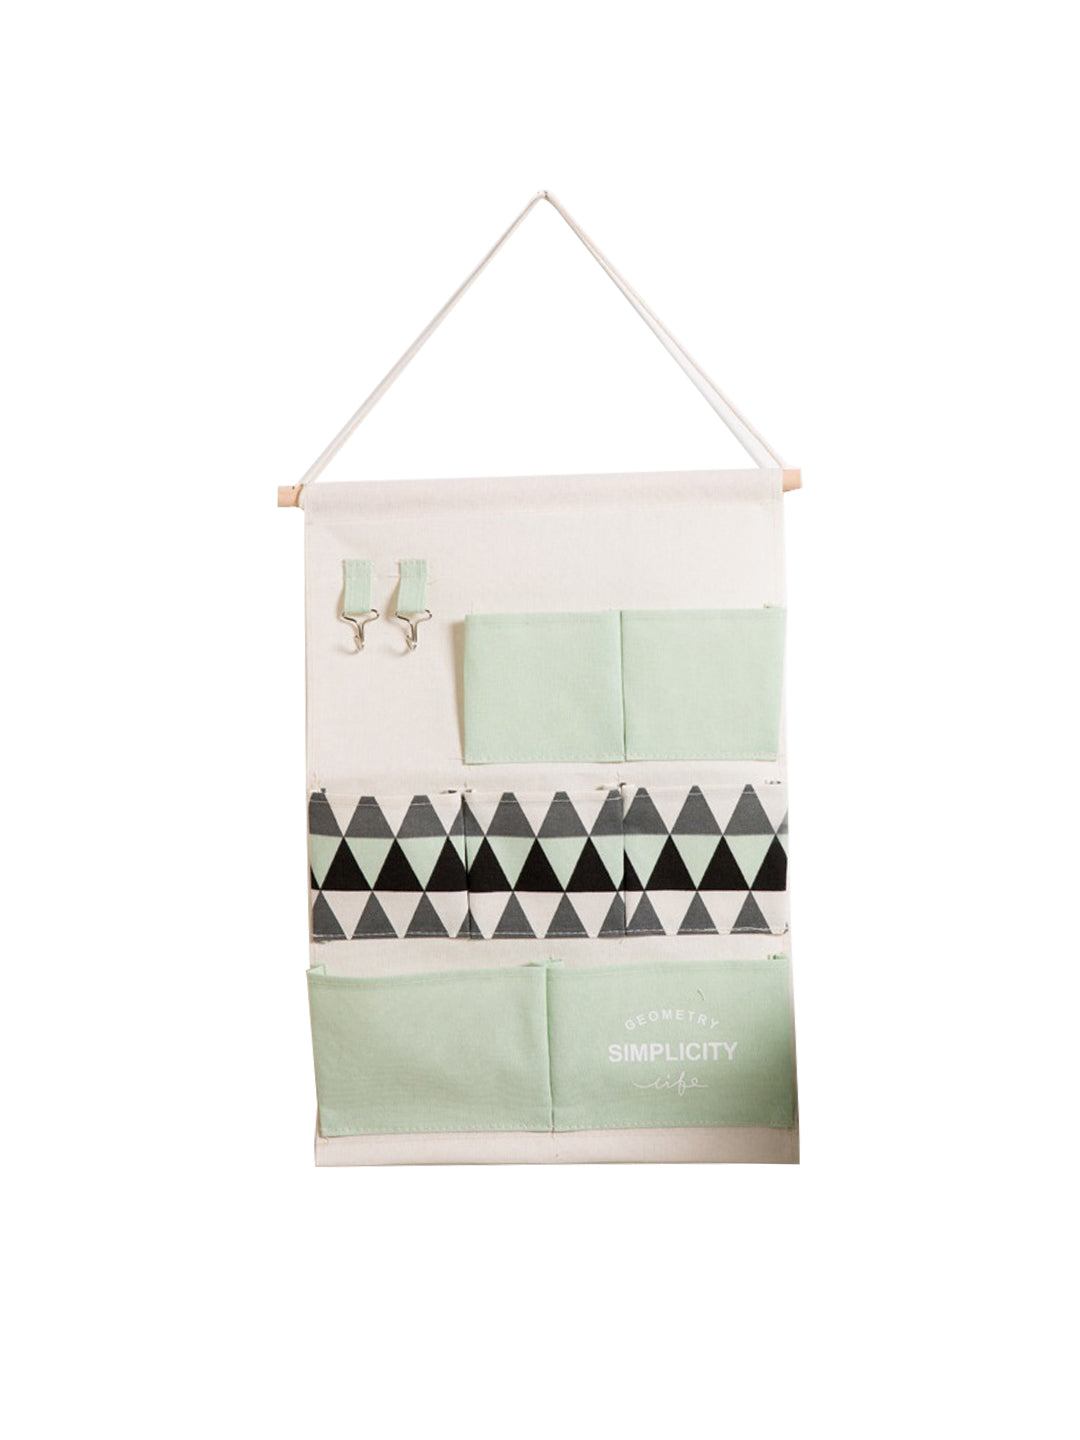 VON CASA Wall Hanging Storage Bag With 7 Pockets And Key Hook - Green